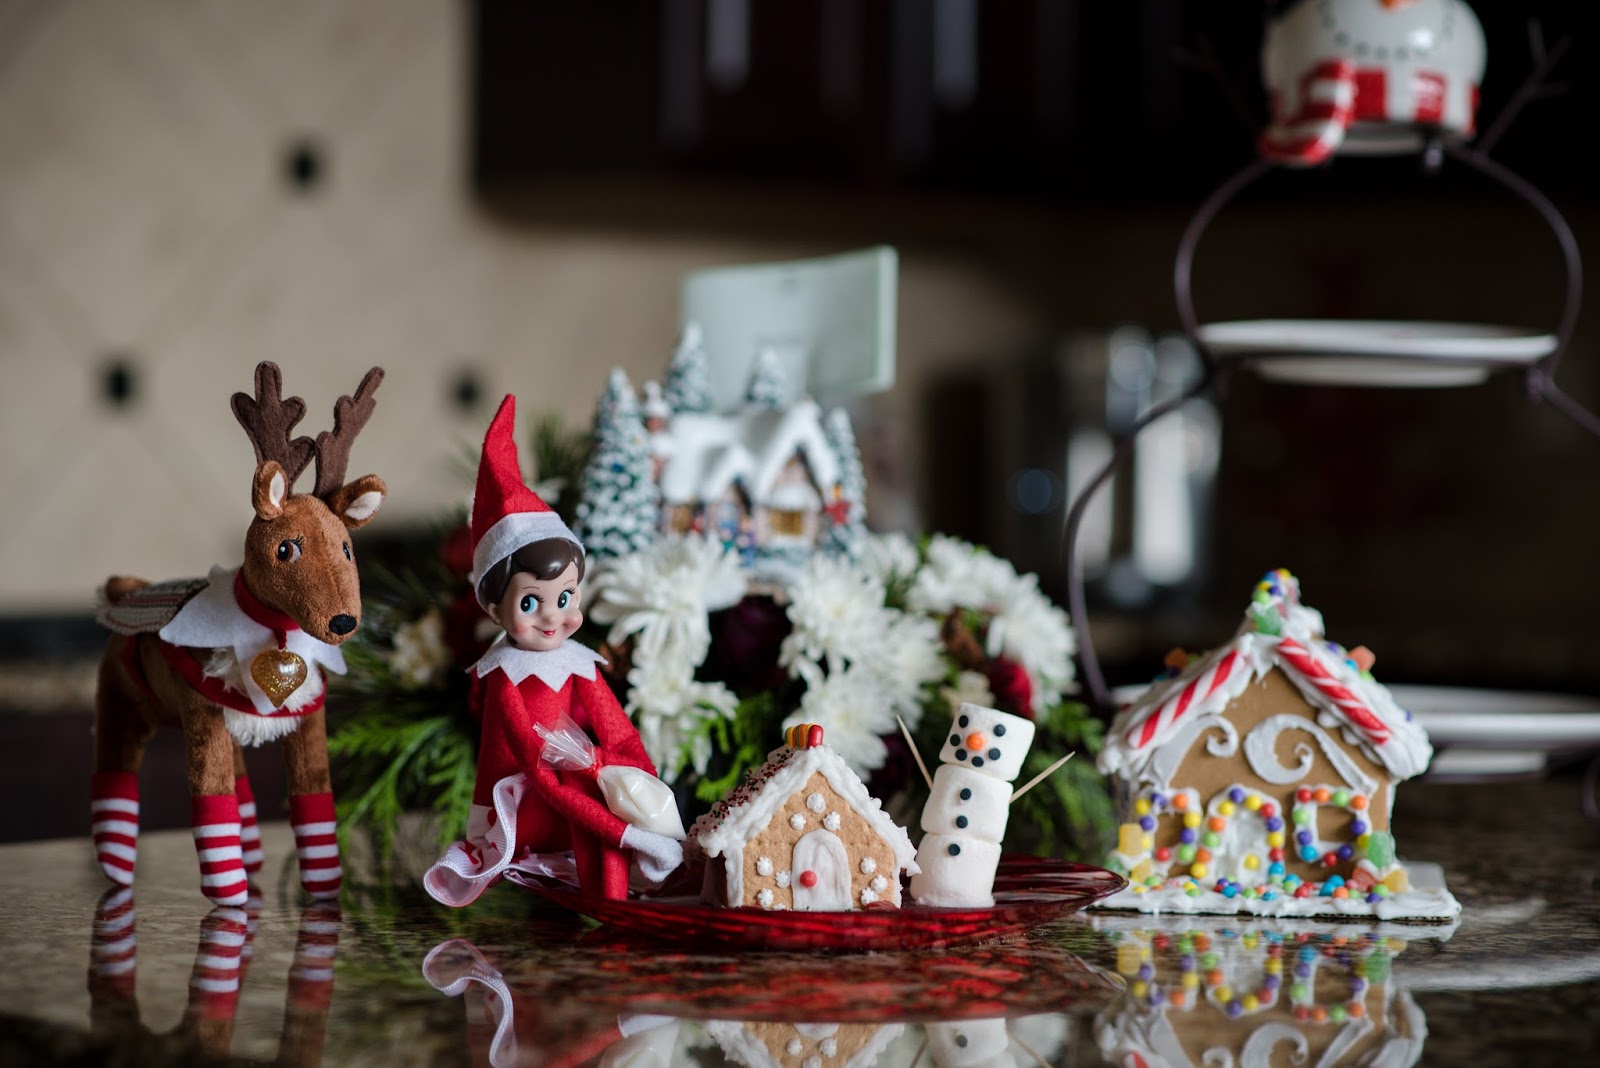 The Sweatman Family: Sprinkles the Elf {Day 24}